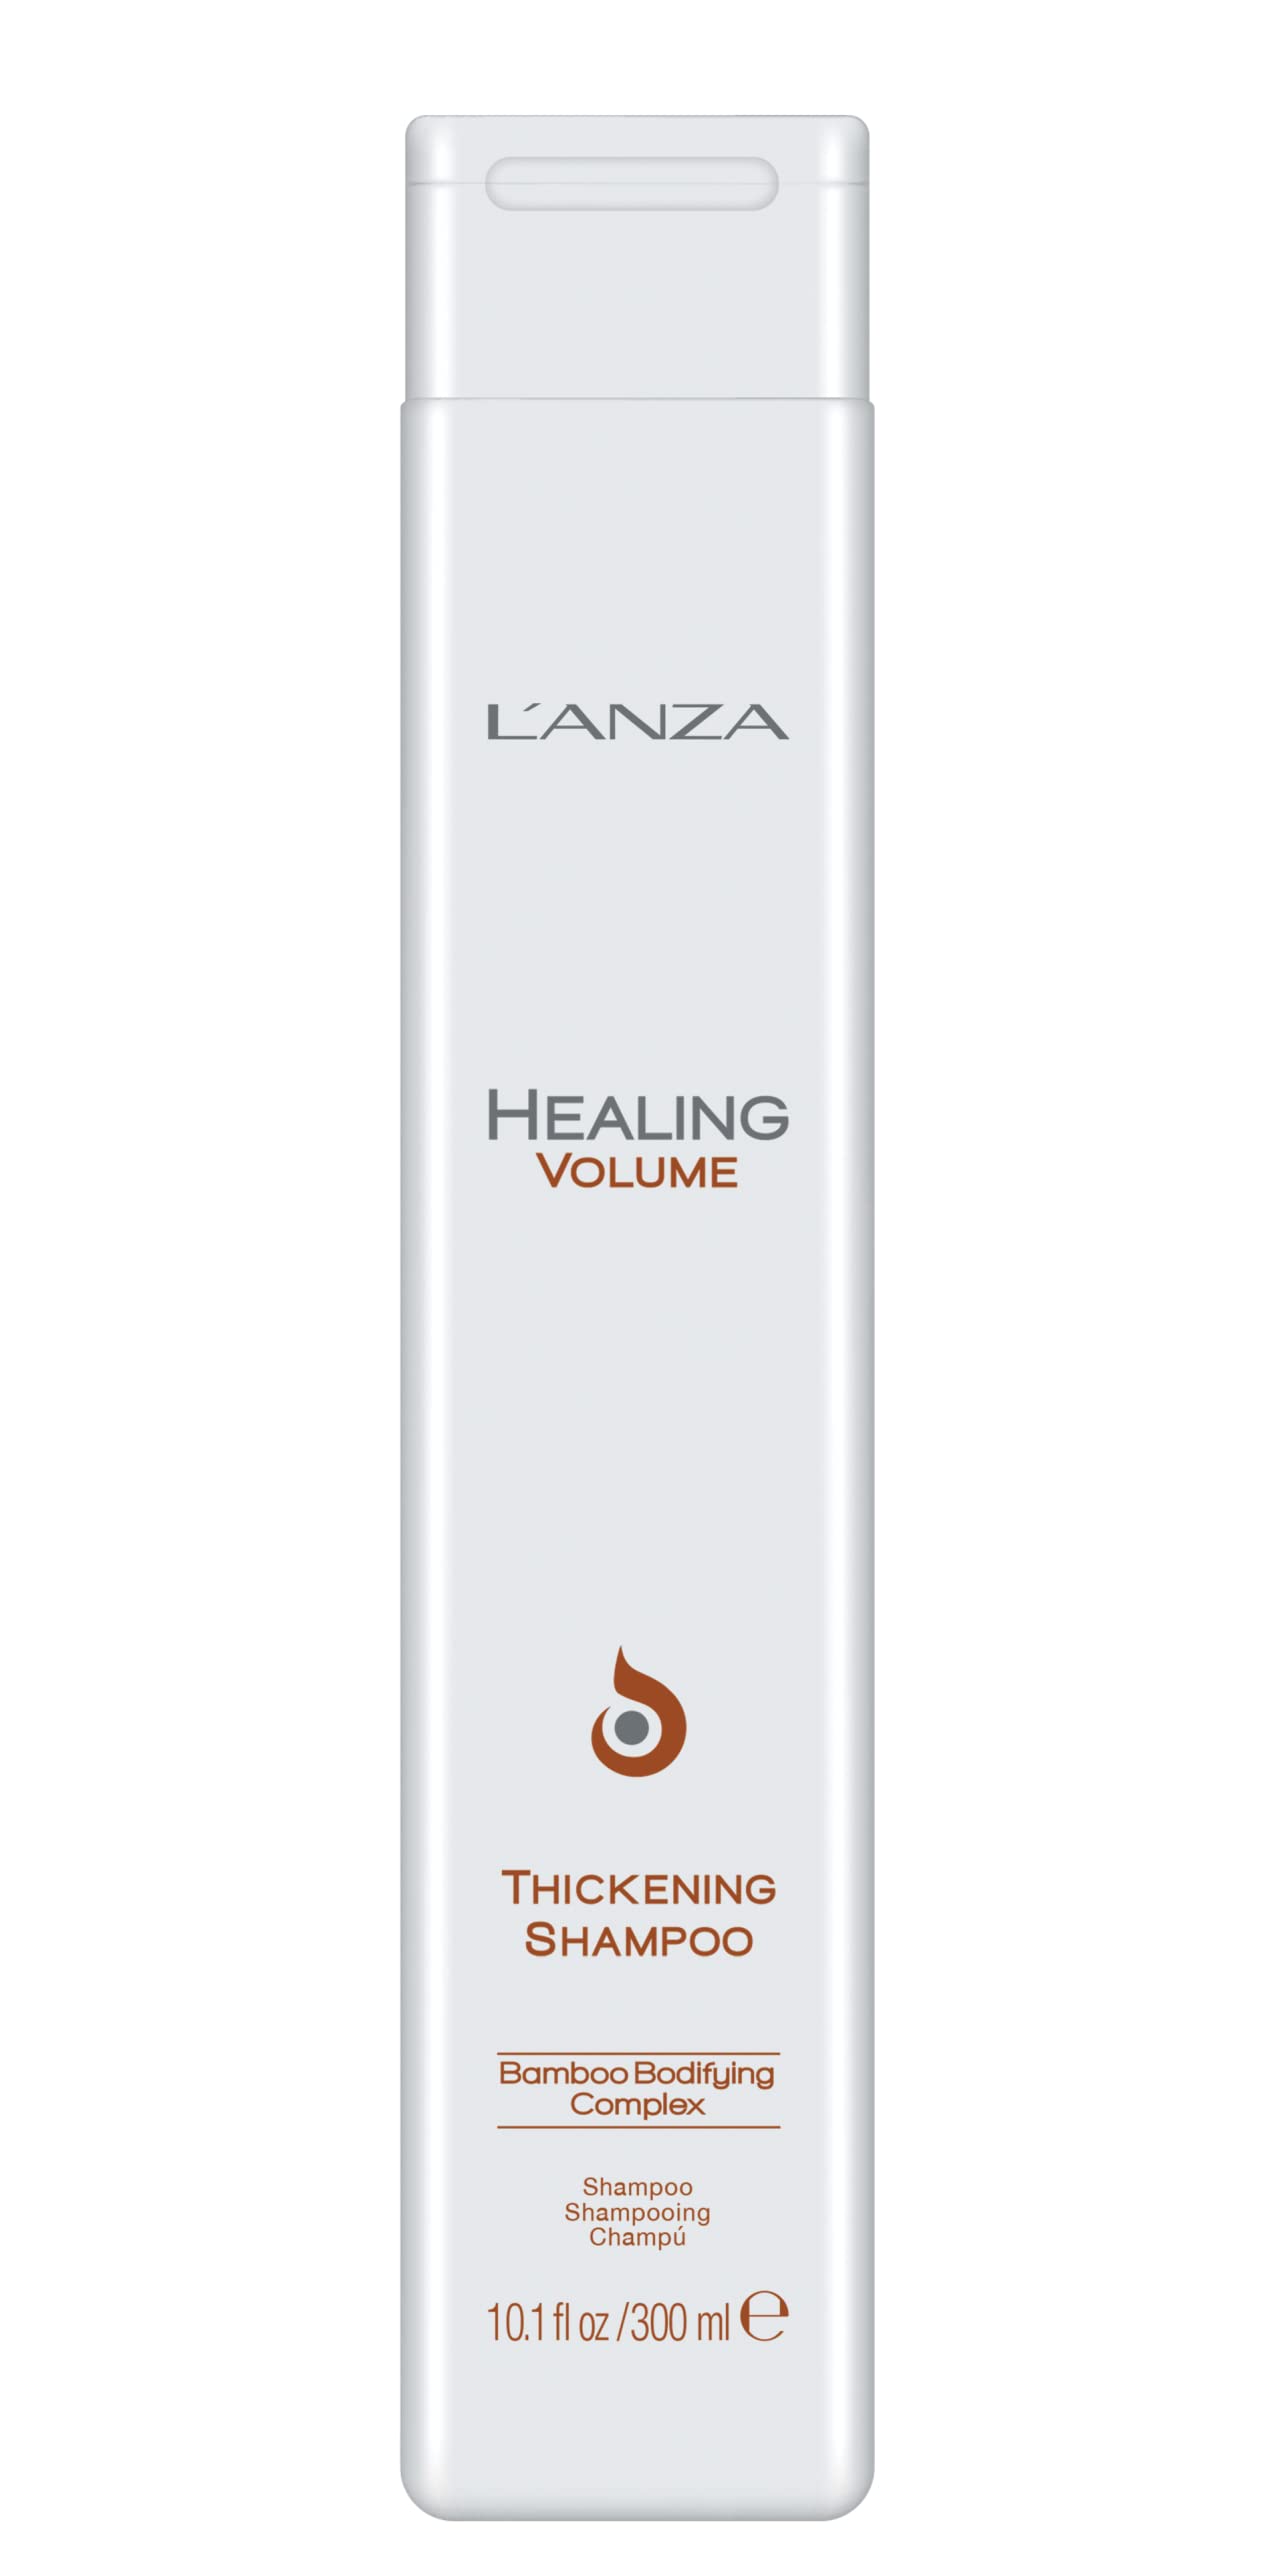 L'ANZA Healing Volume Thickening Shampoo, Boosts Shine, Volume, and Thickness for Fine and Flat Hair, Rich with Bamboo Bodifying Complex and Keratin (10.1 Fl Oz)